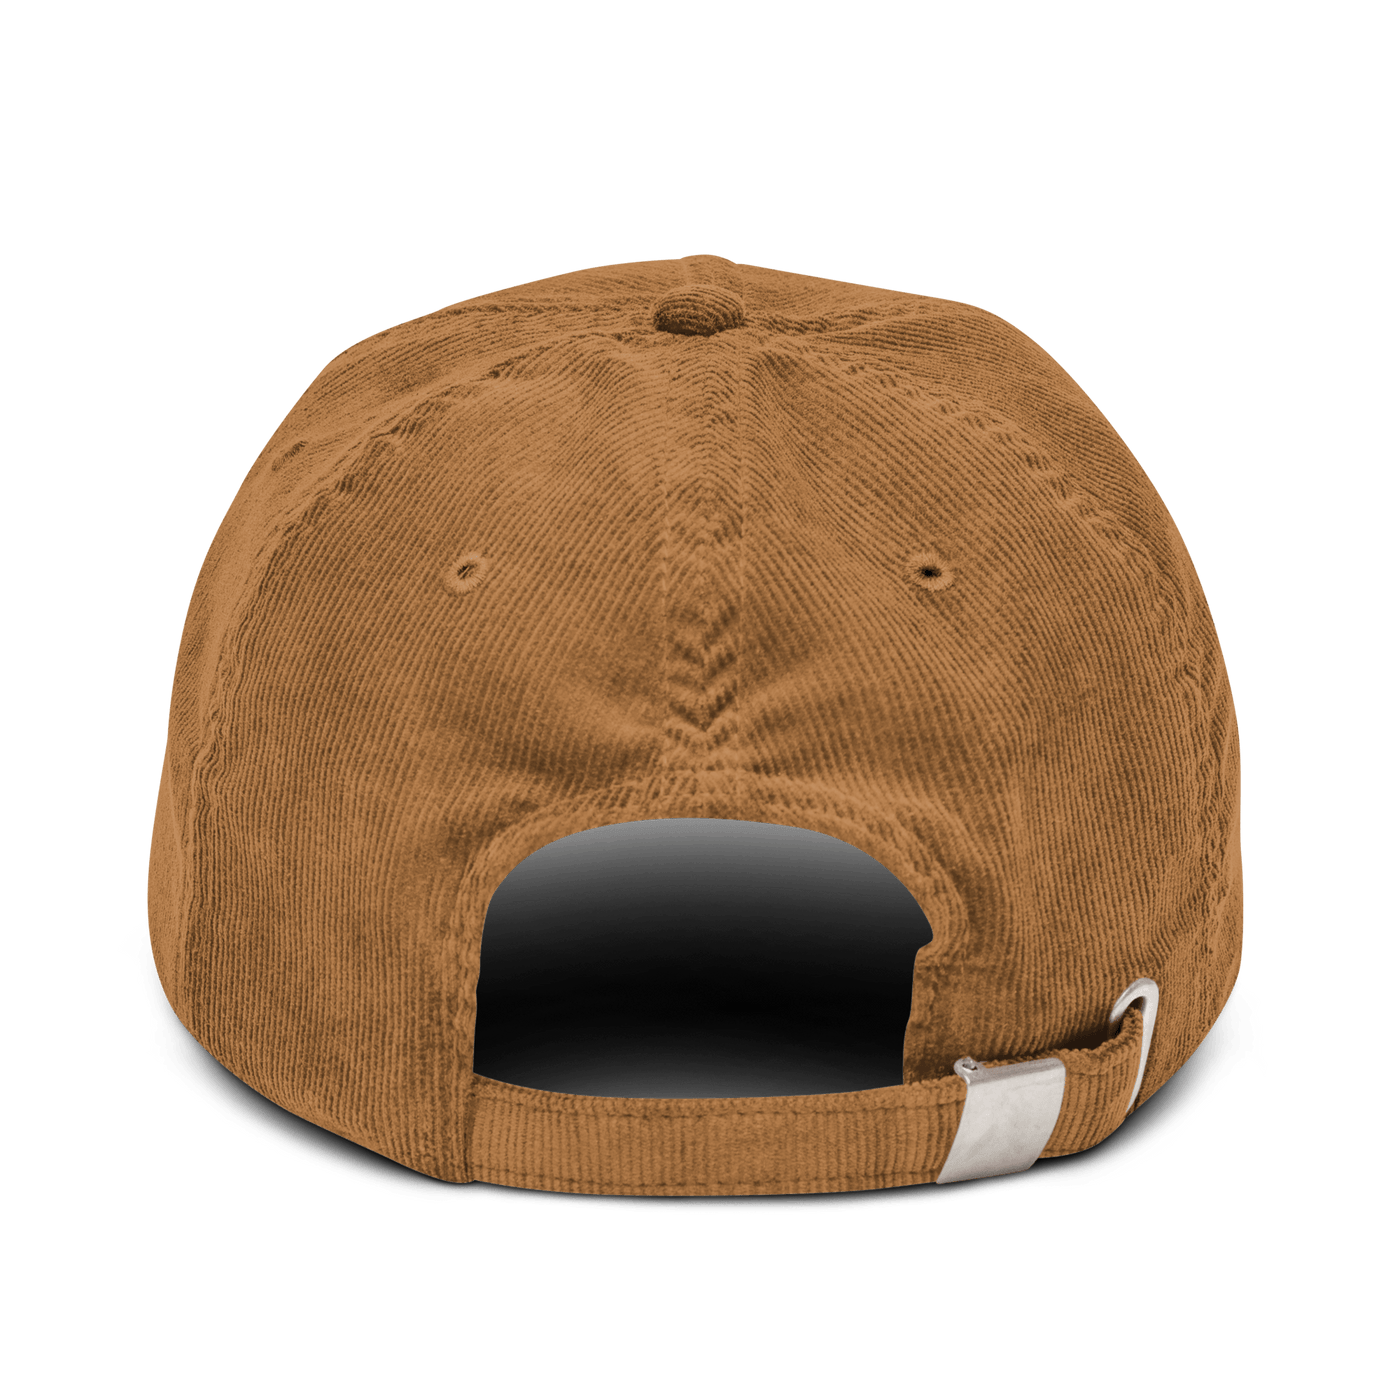 UFO Corduroy hat - Camel - - Just Another Cap Store